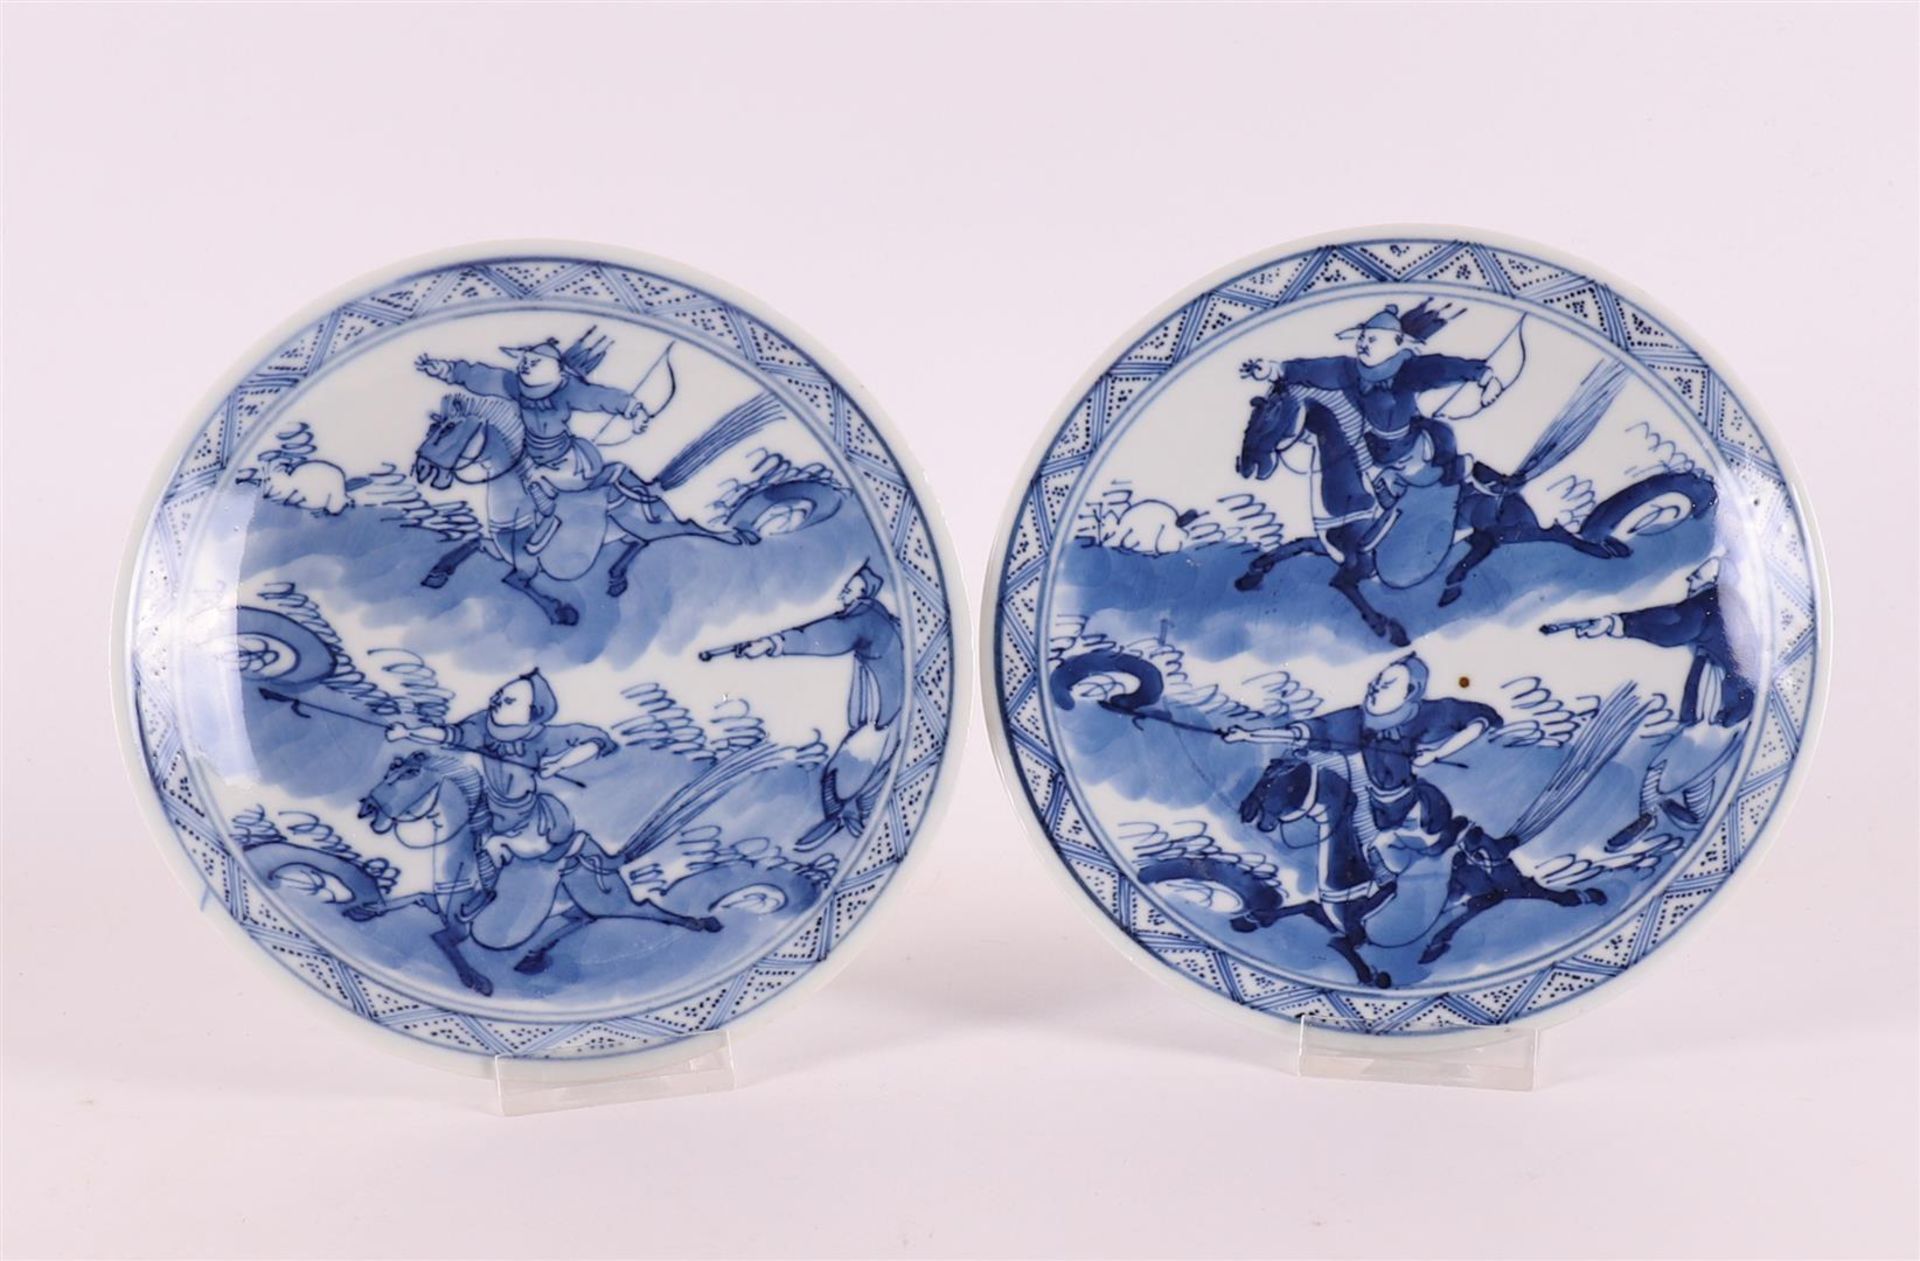 A pair of blue and white porcelain plates, China, 19th century. Blue underglaze decoration of '